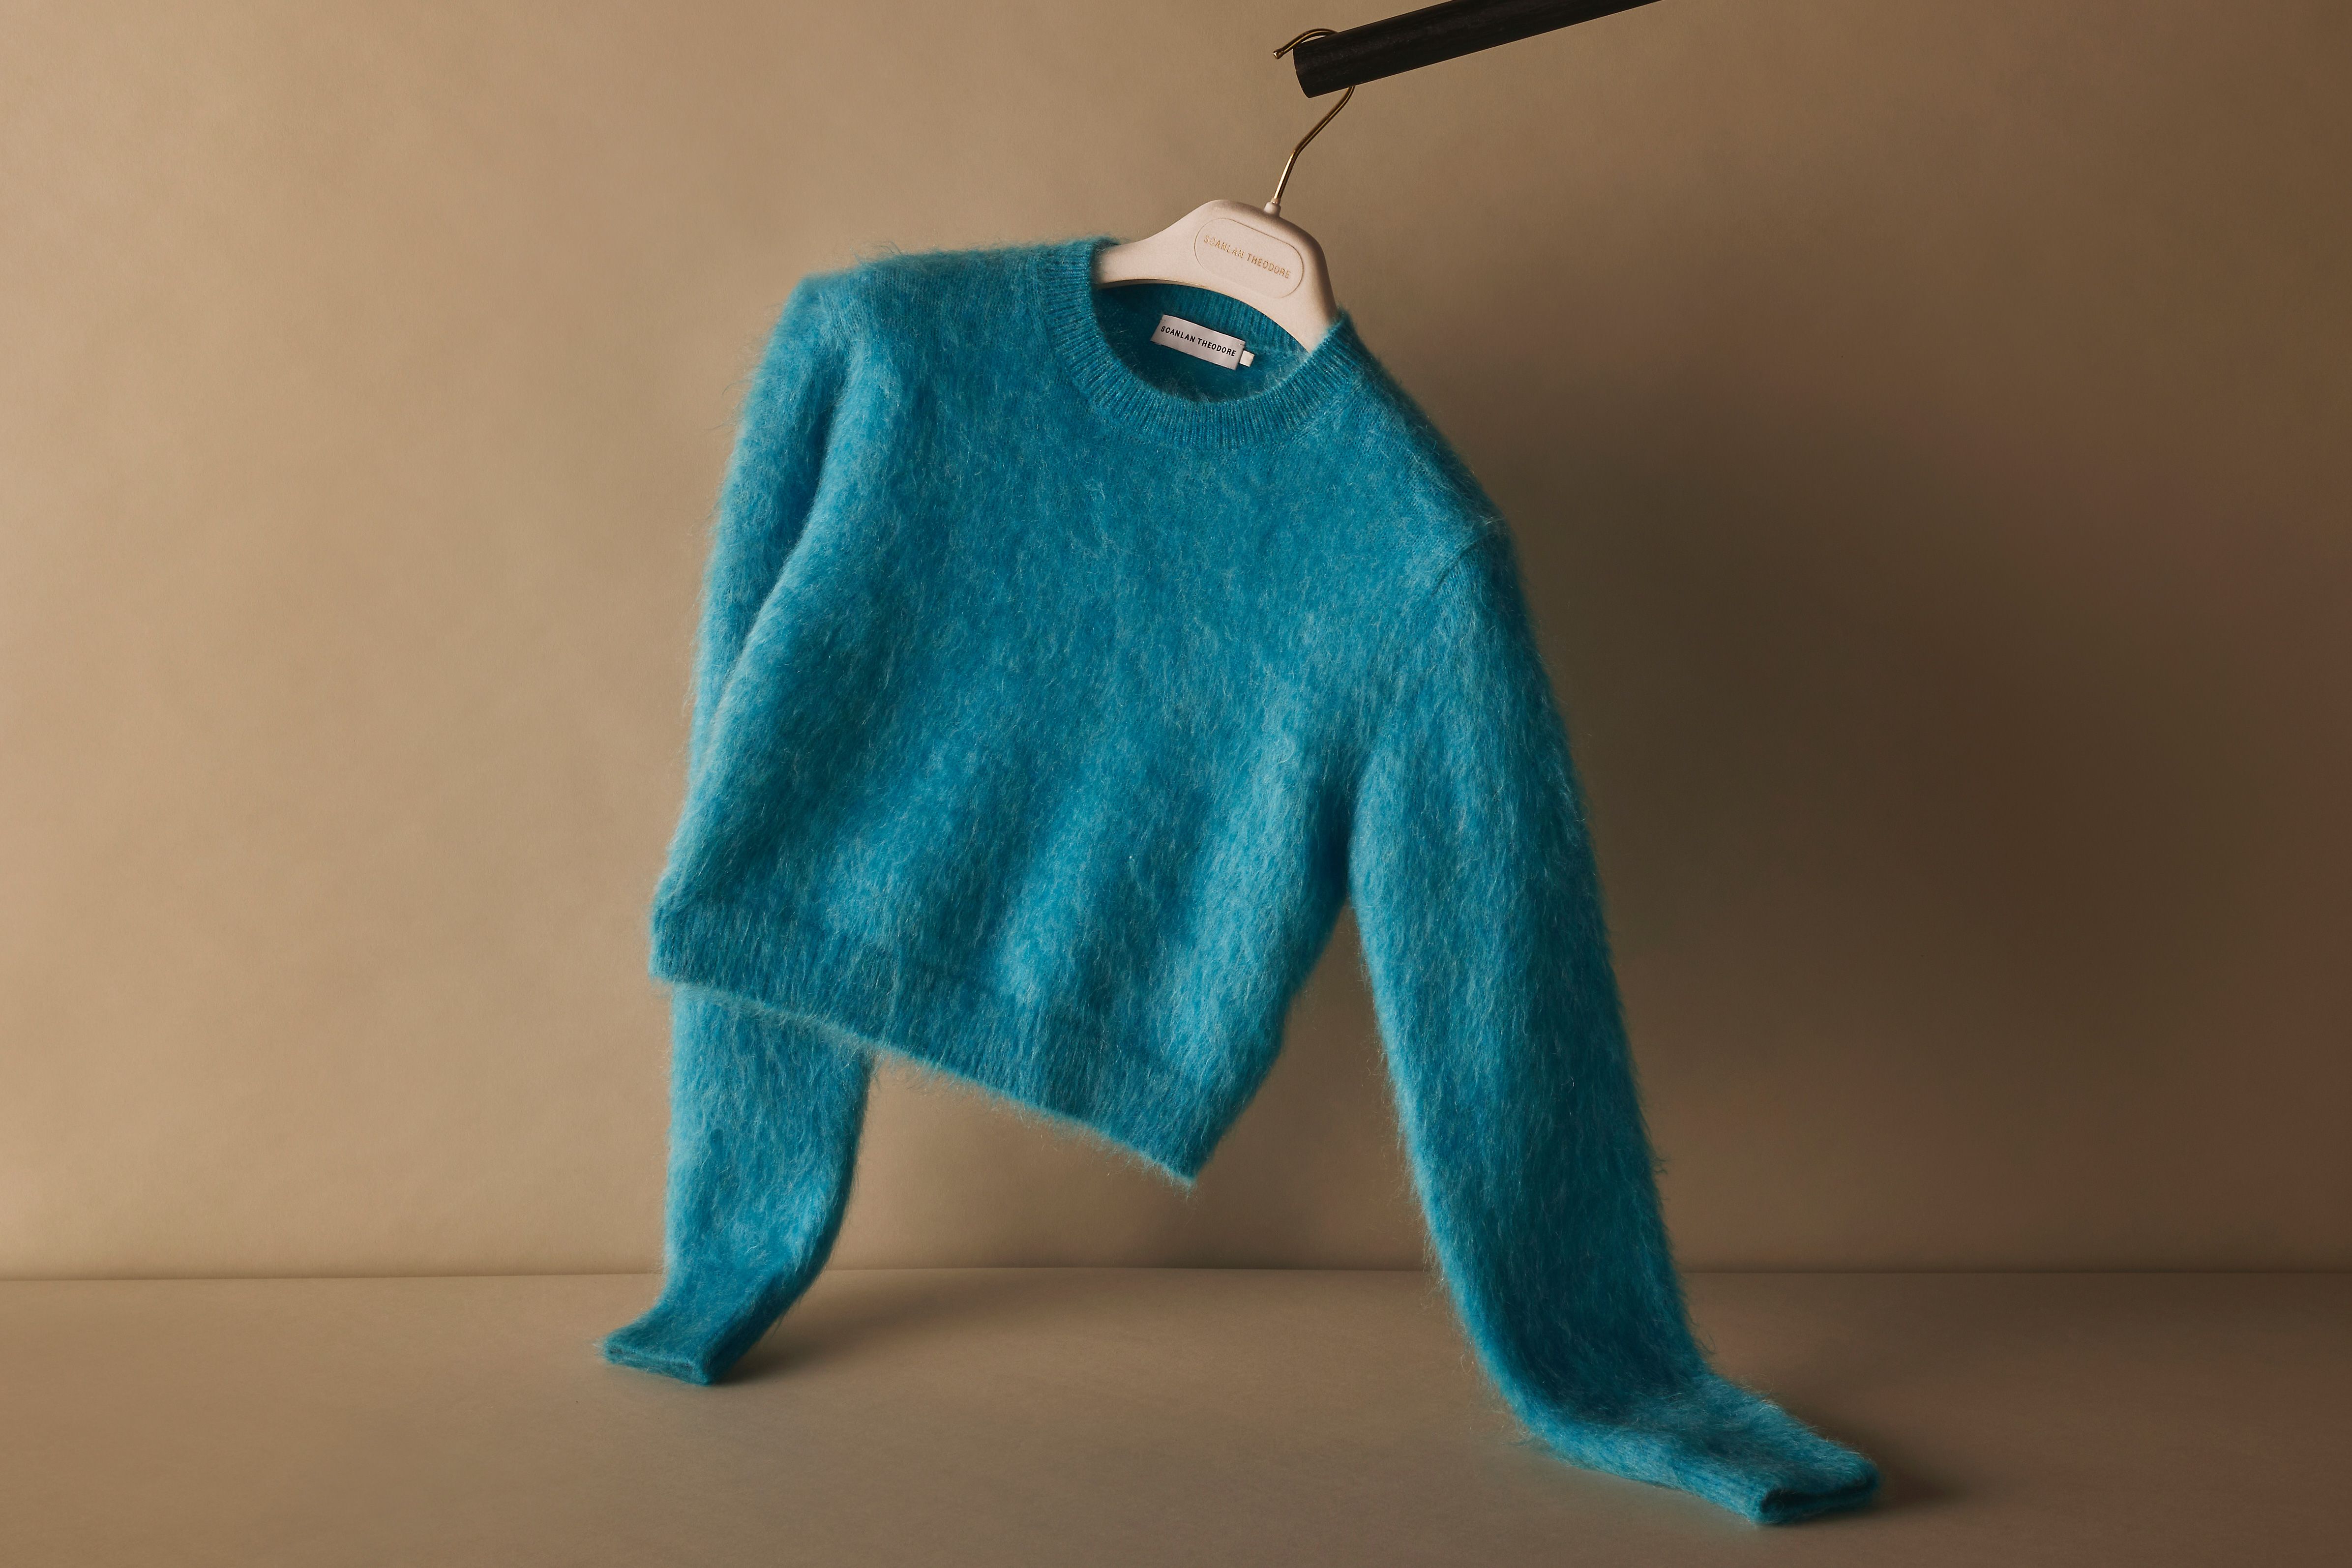 Scanlan Theodore brushed mohair sweater hanging on a rail.